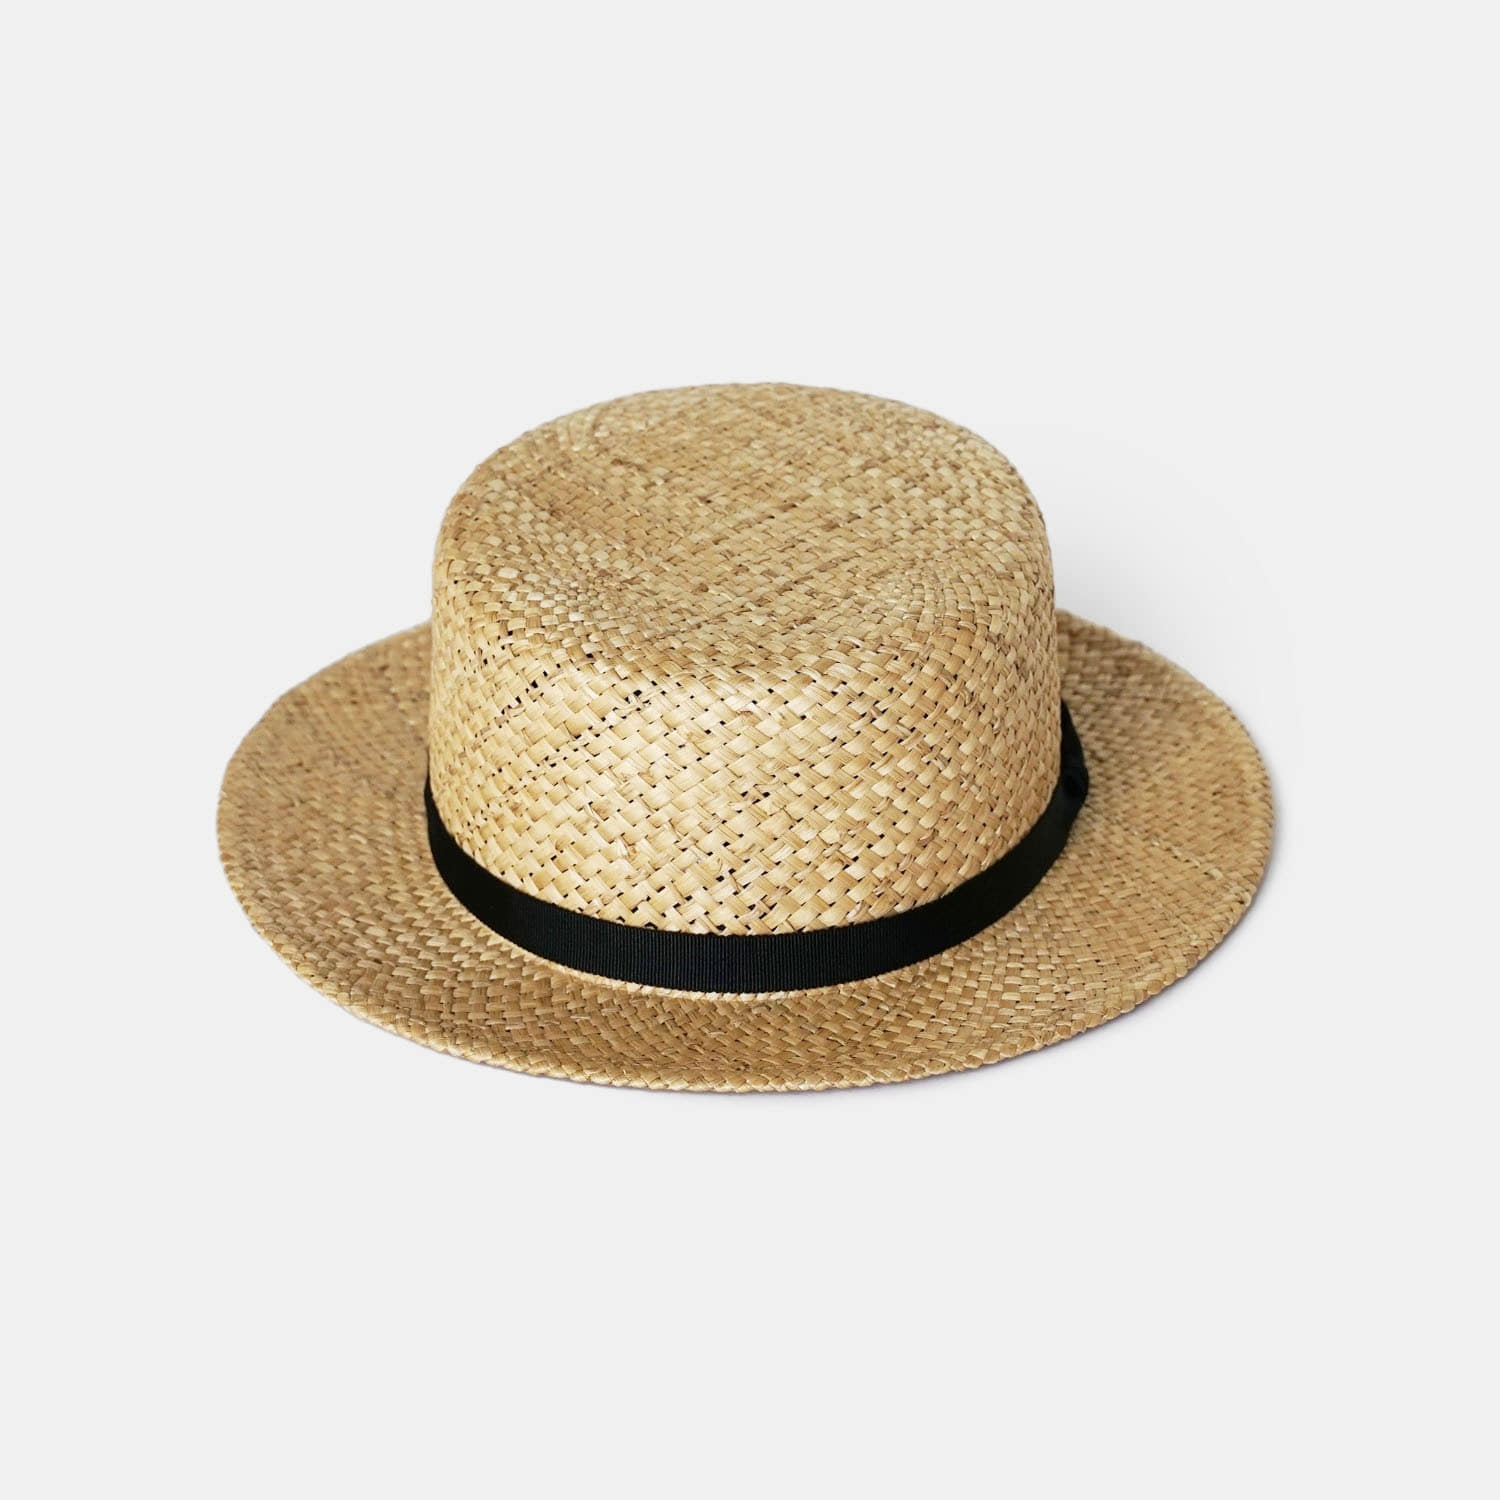 ﻿Straw Boater Hat